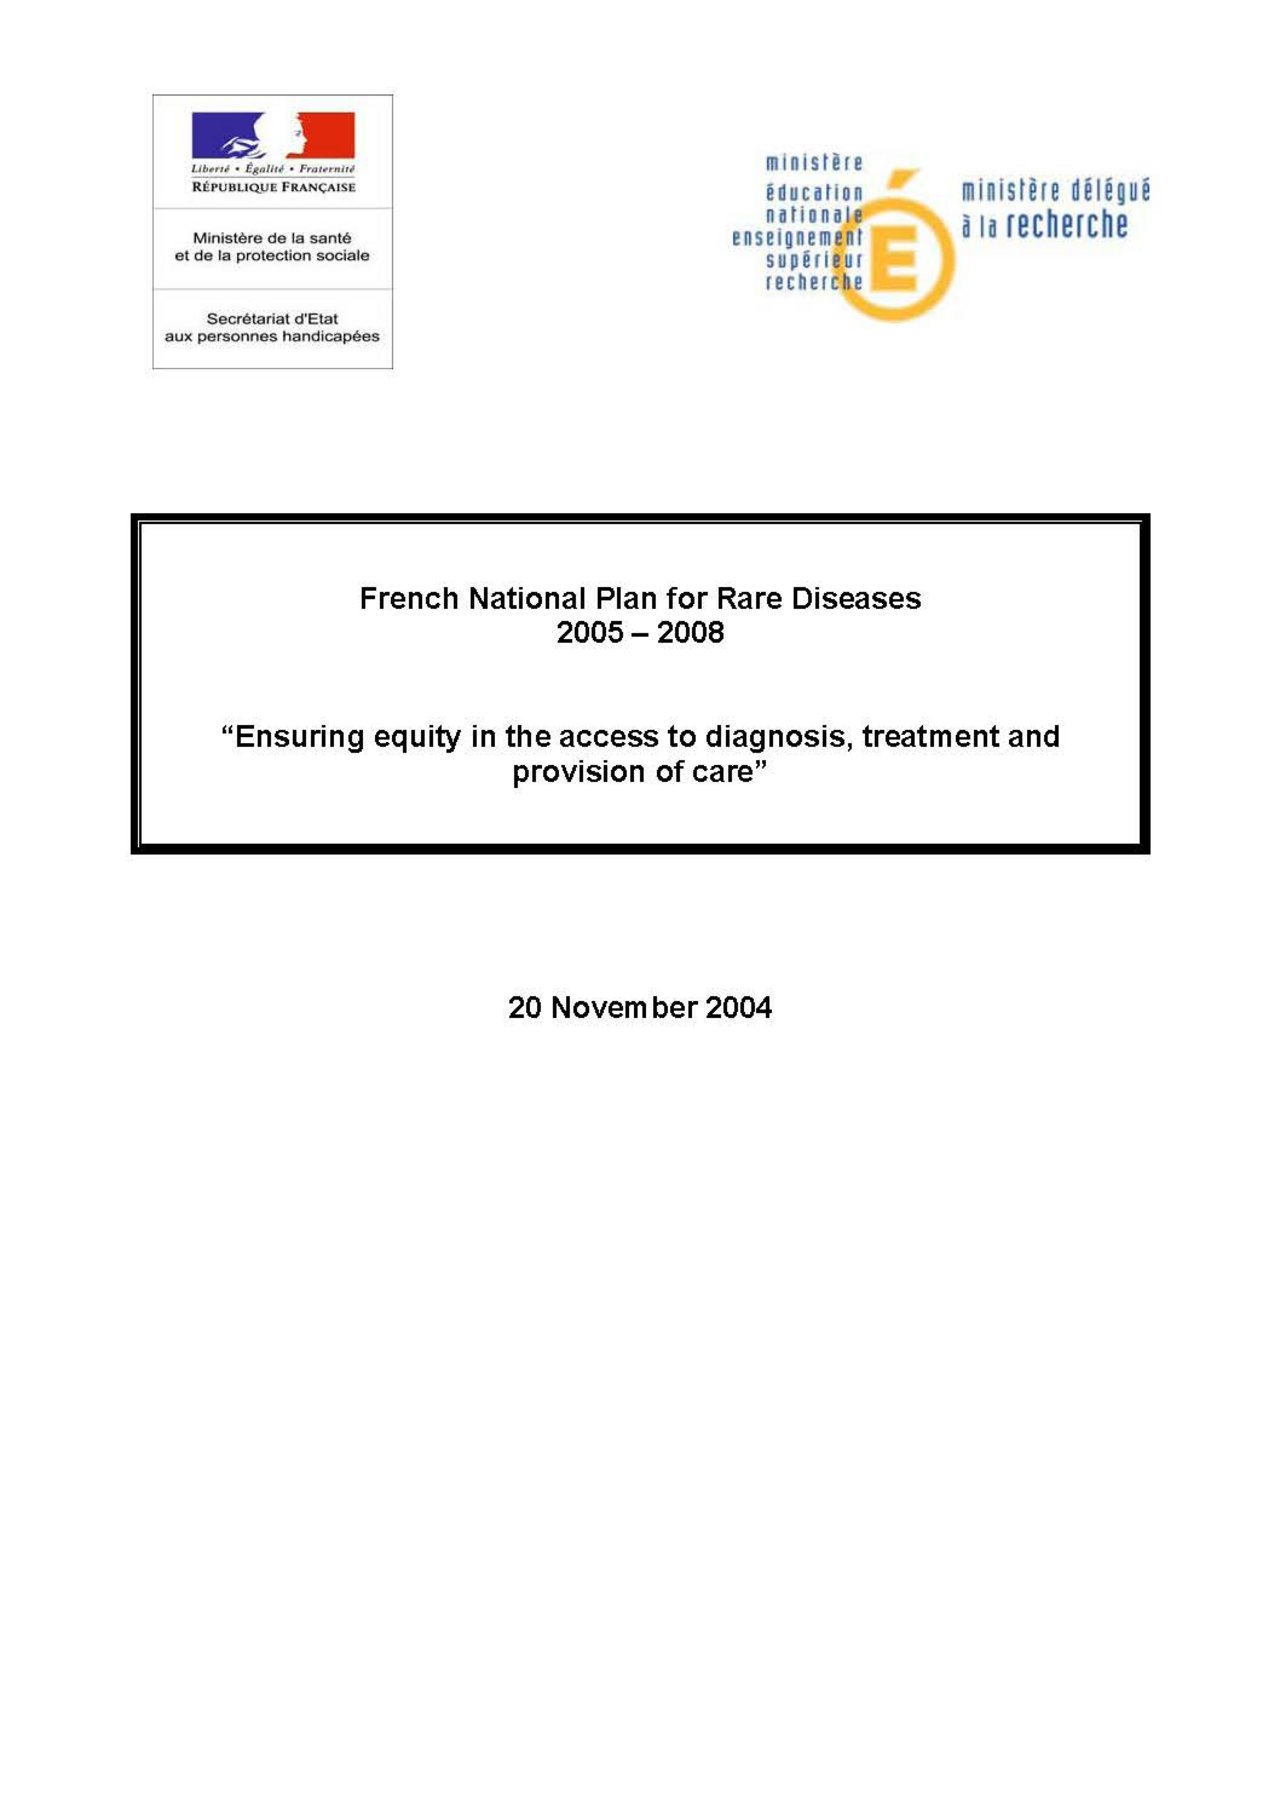 Cover First French National Rare Disease Plan 2005 2008